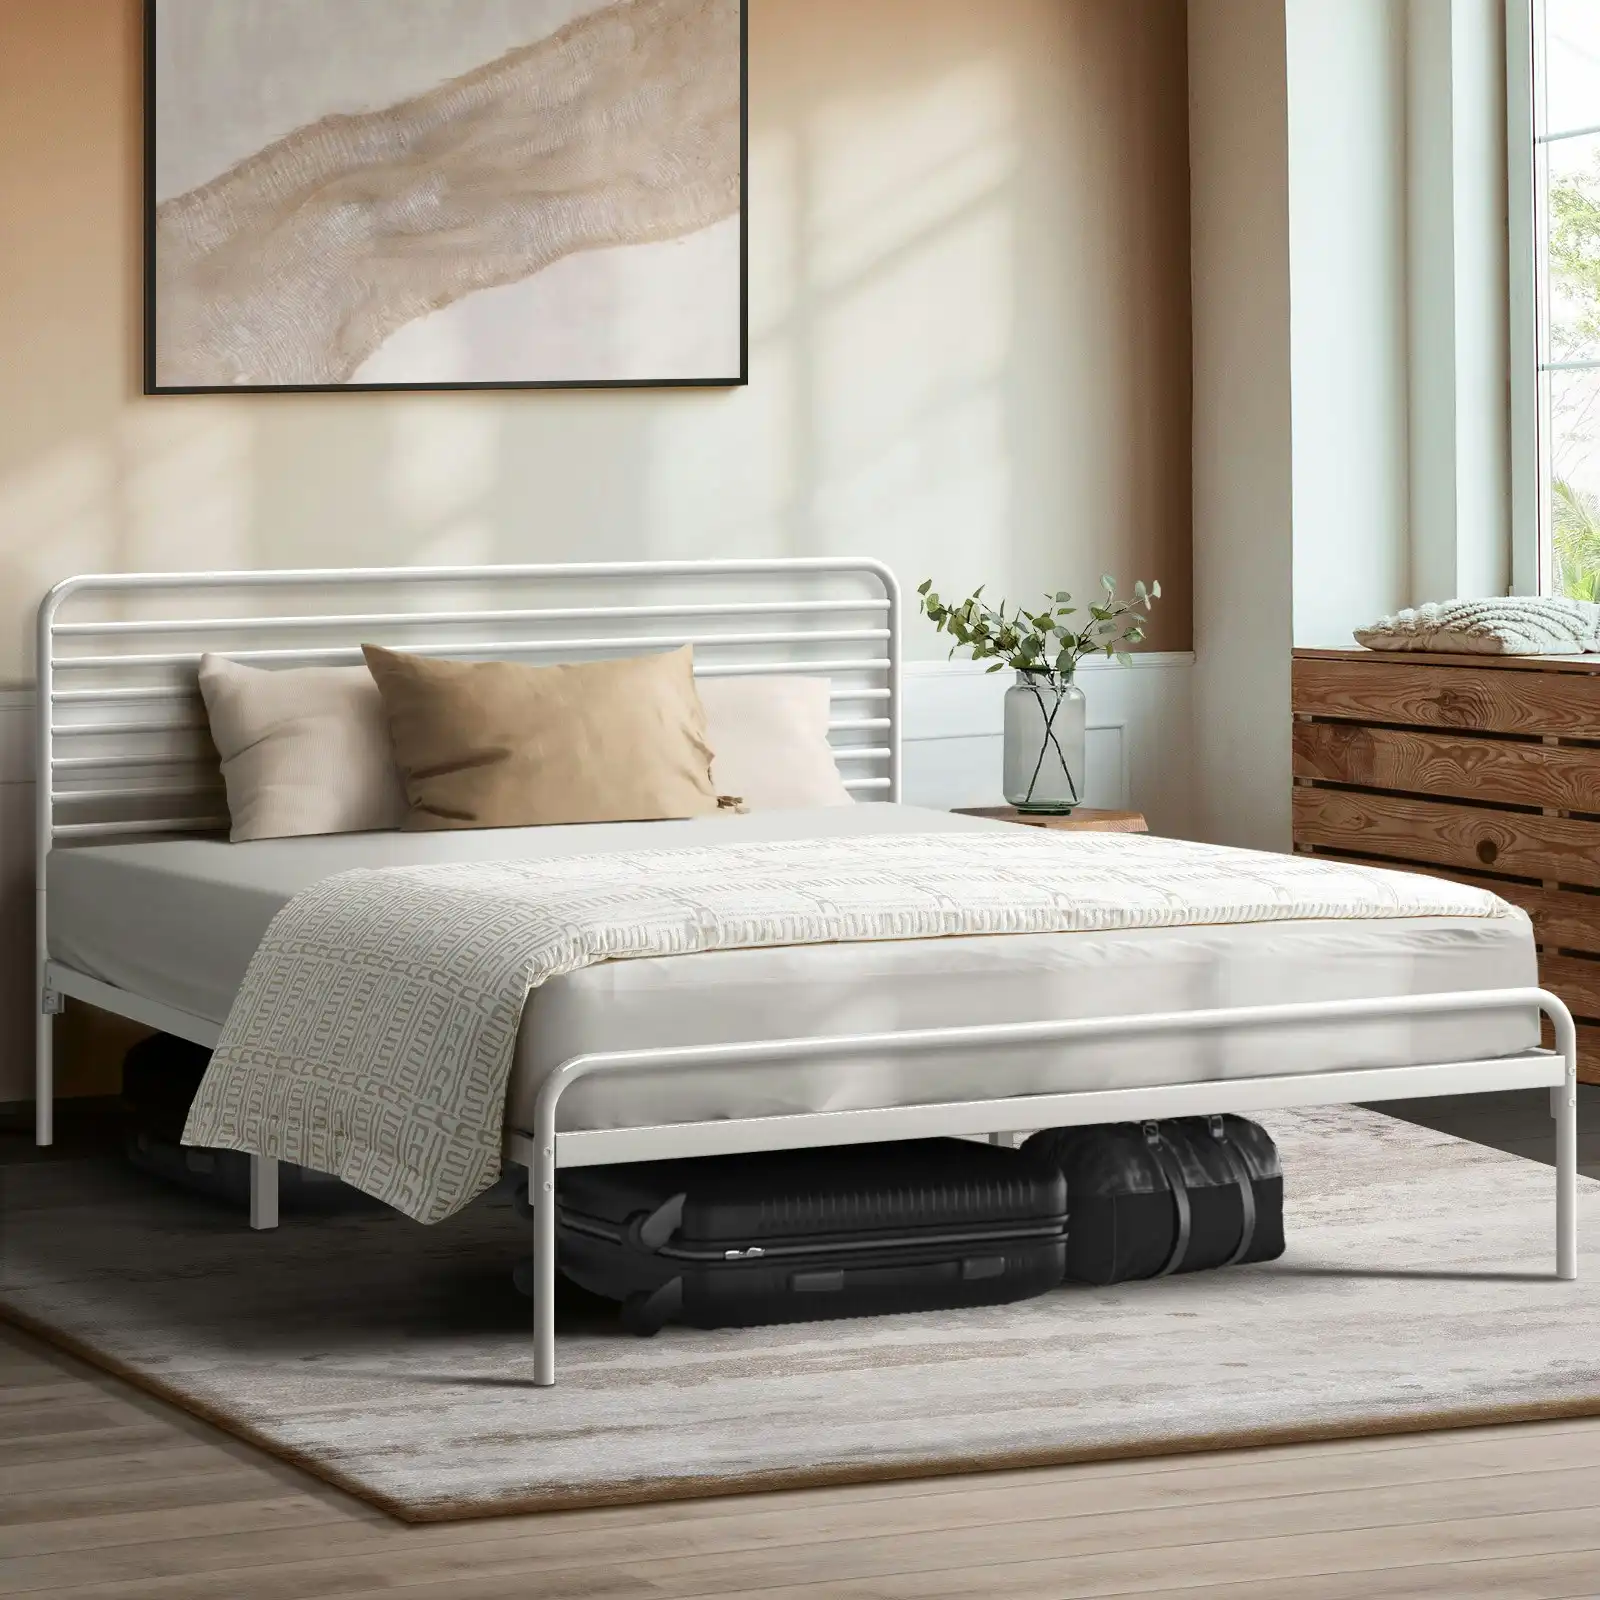 Oikiture Metal Bed Frame Double Size Bed Base Beds Platform White